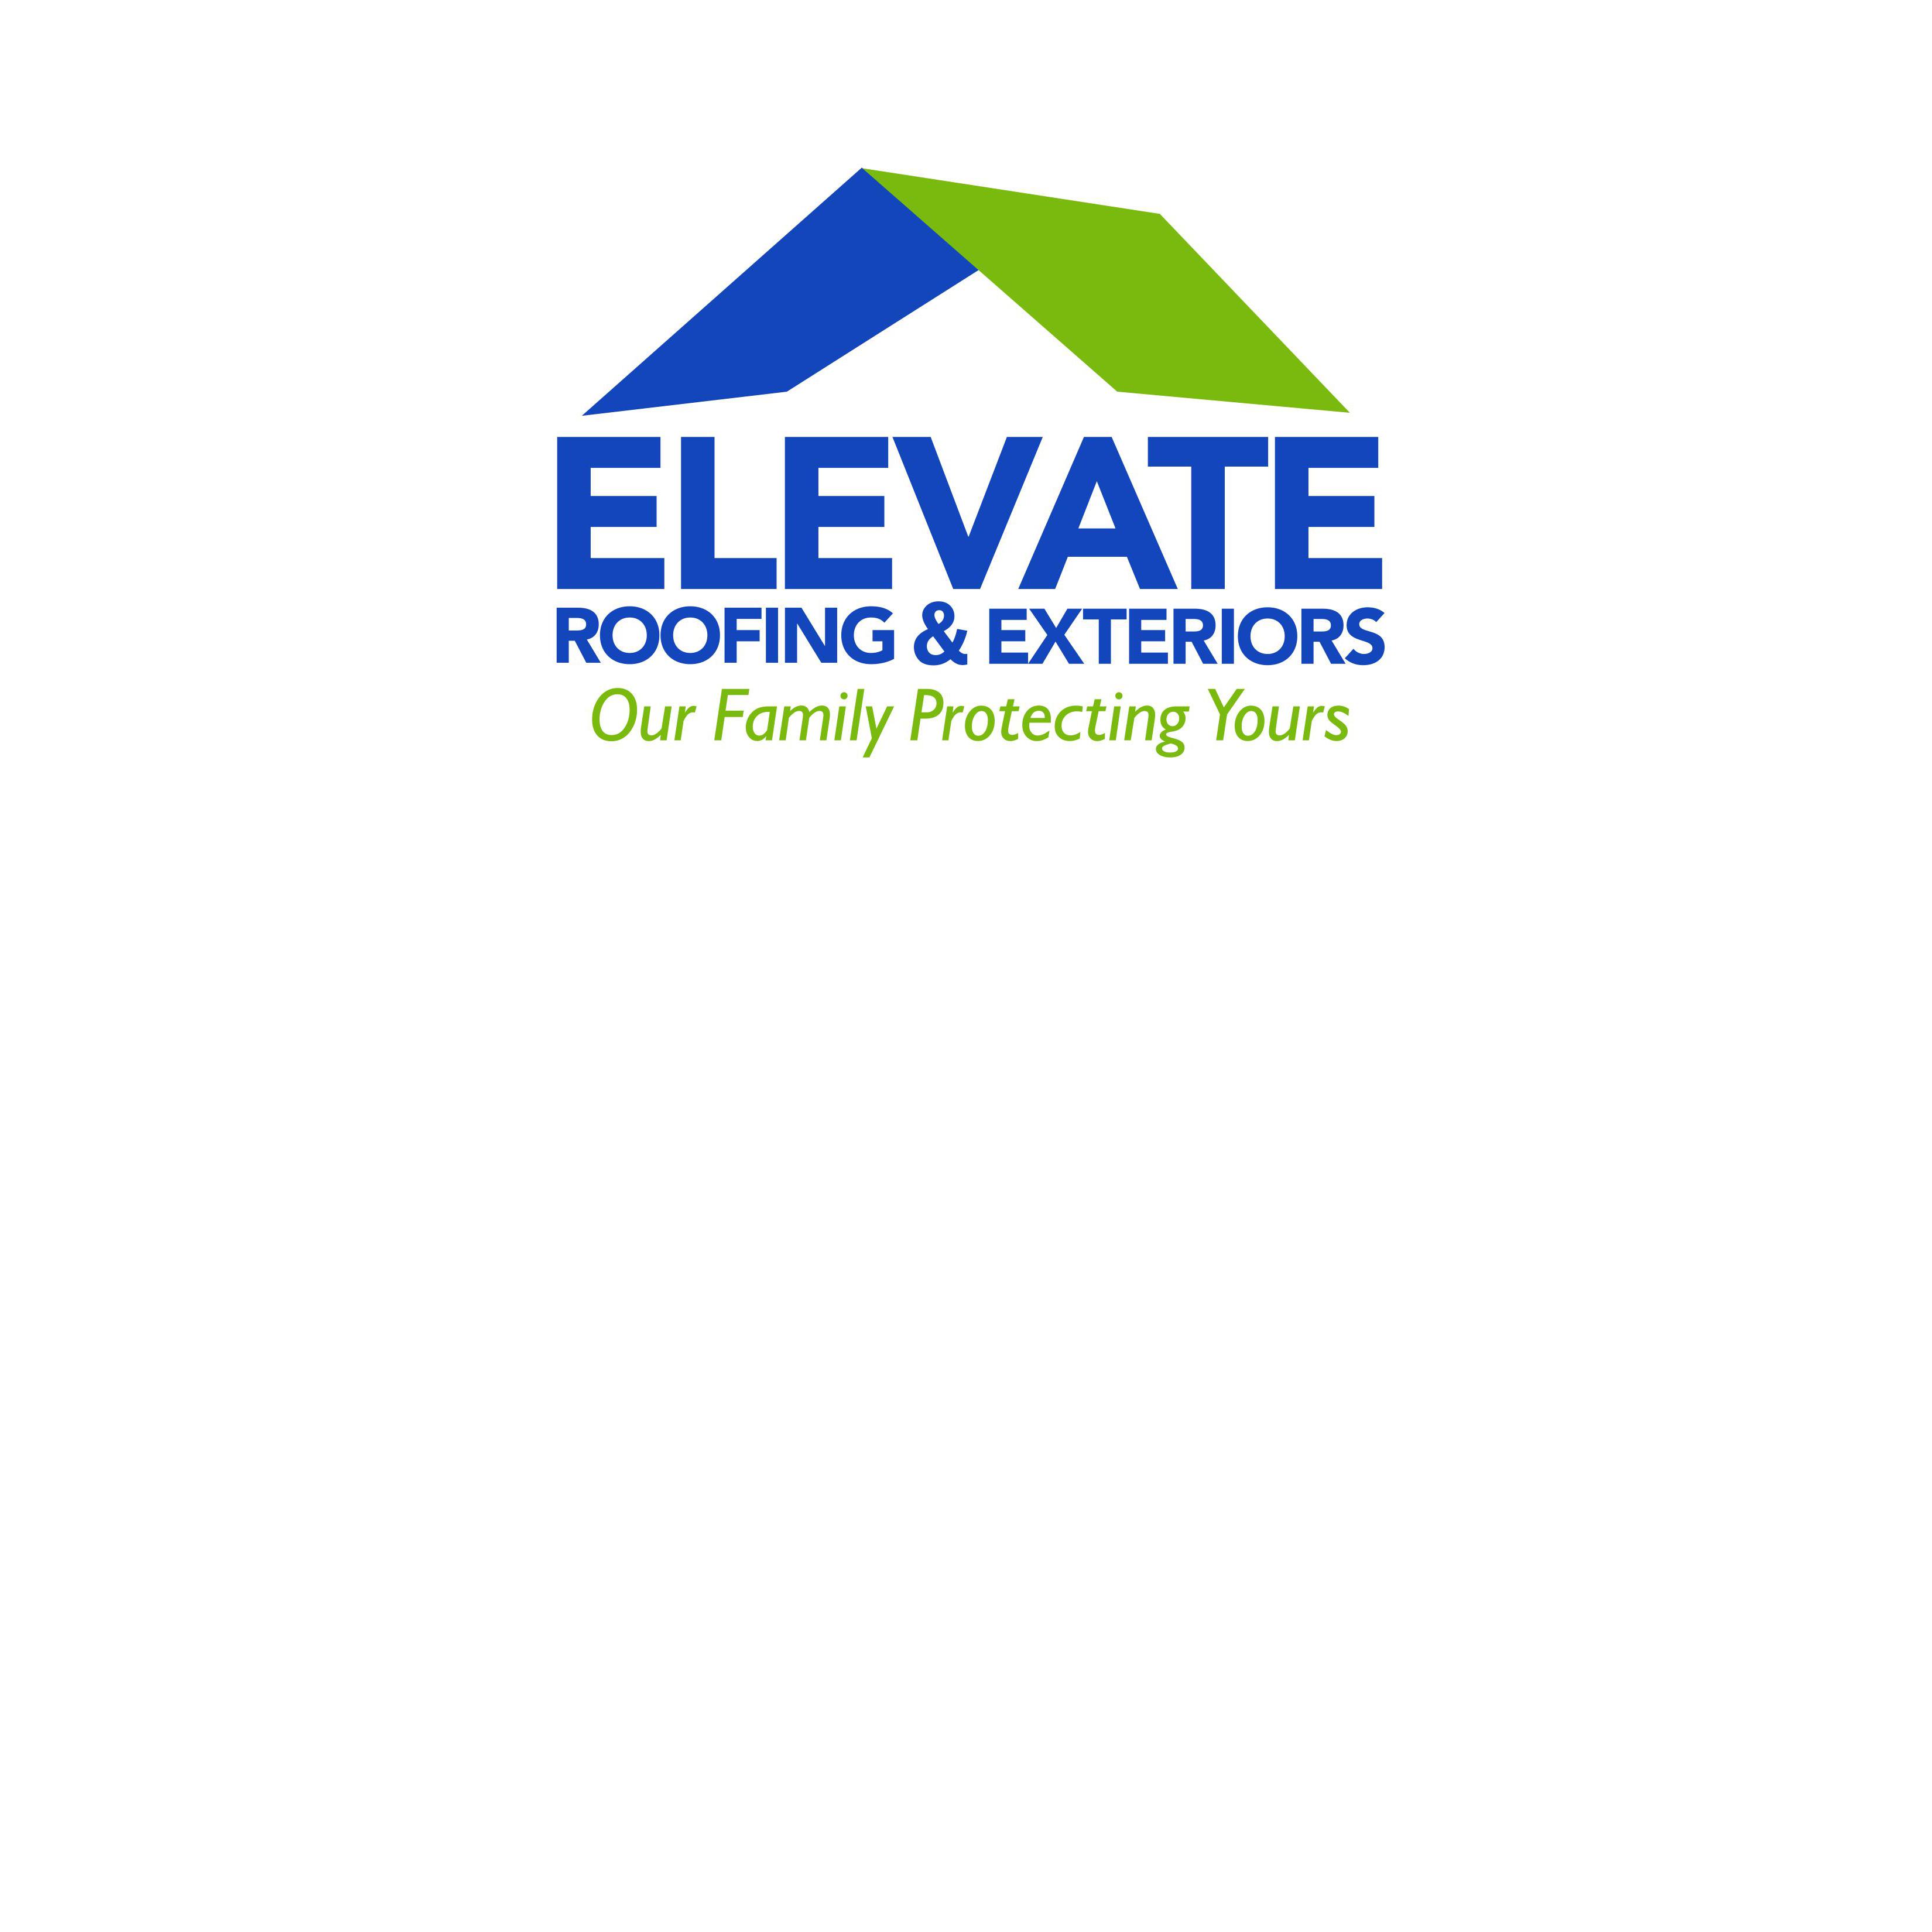 Elevate Roofing and Exteriors